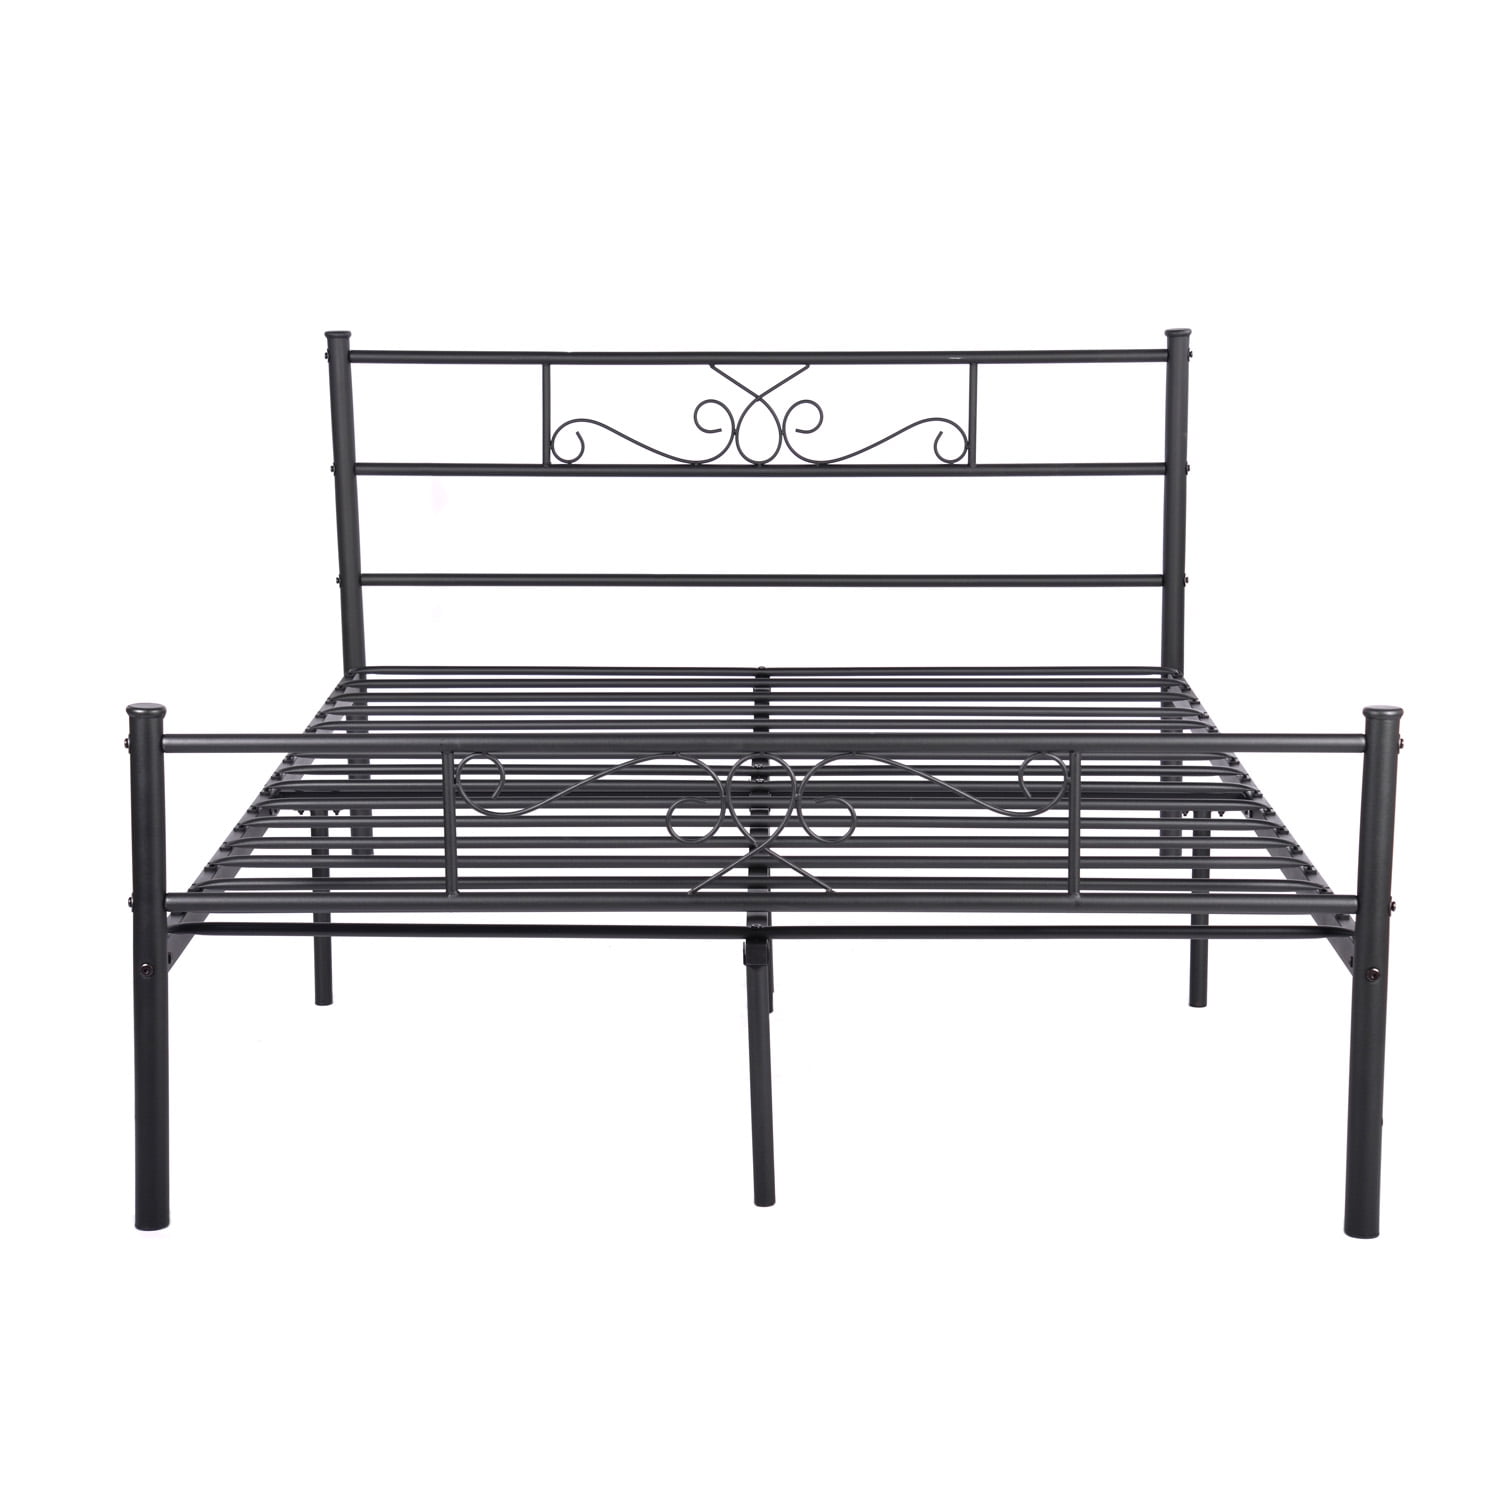 Cheerwing Easy Set Up Premium Metal Bed, How To Set Up A Full Size Metal Bed Frame